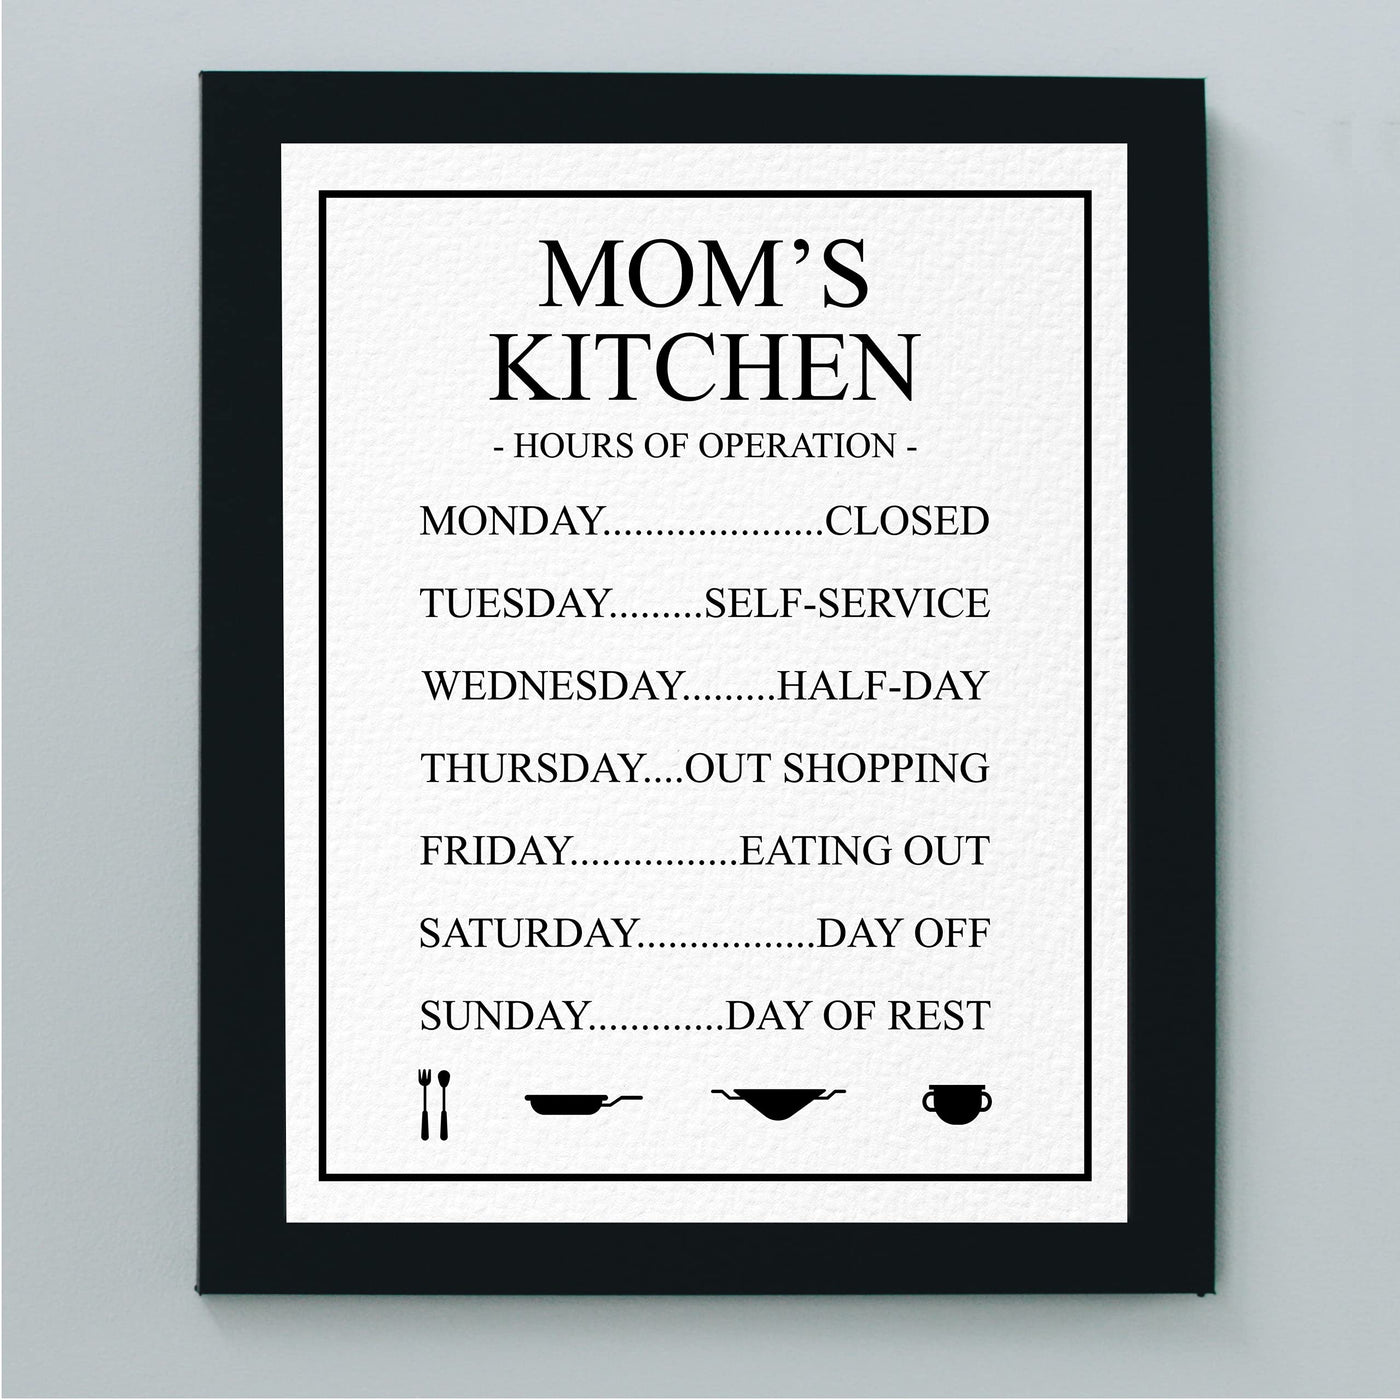 Mom's Kitchen-Hours of Operation Funny Wall Sign -8 x 10" Rustic Farmhouse Art Print -Ready to Frame. Humorous Decoration for Home-Kitchen-Country Decor. Fun Gift for Mom! Printed on Photo Paper.